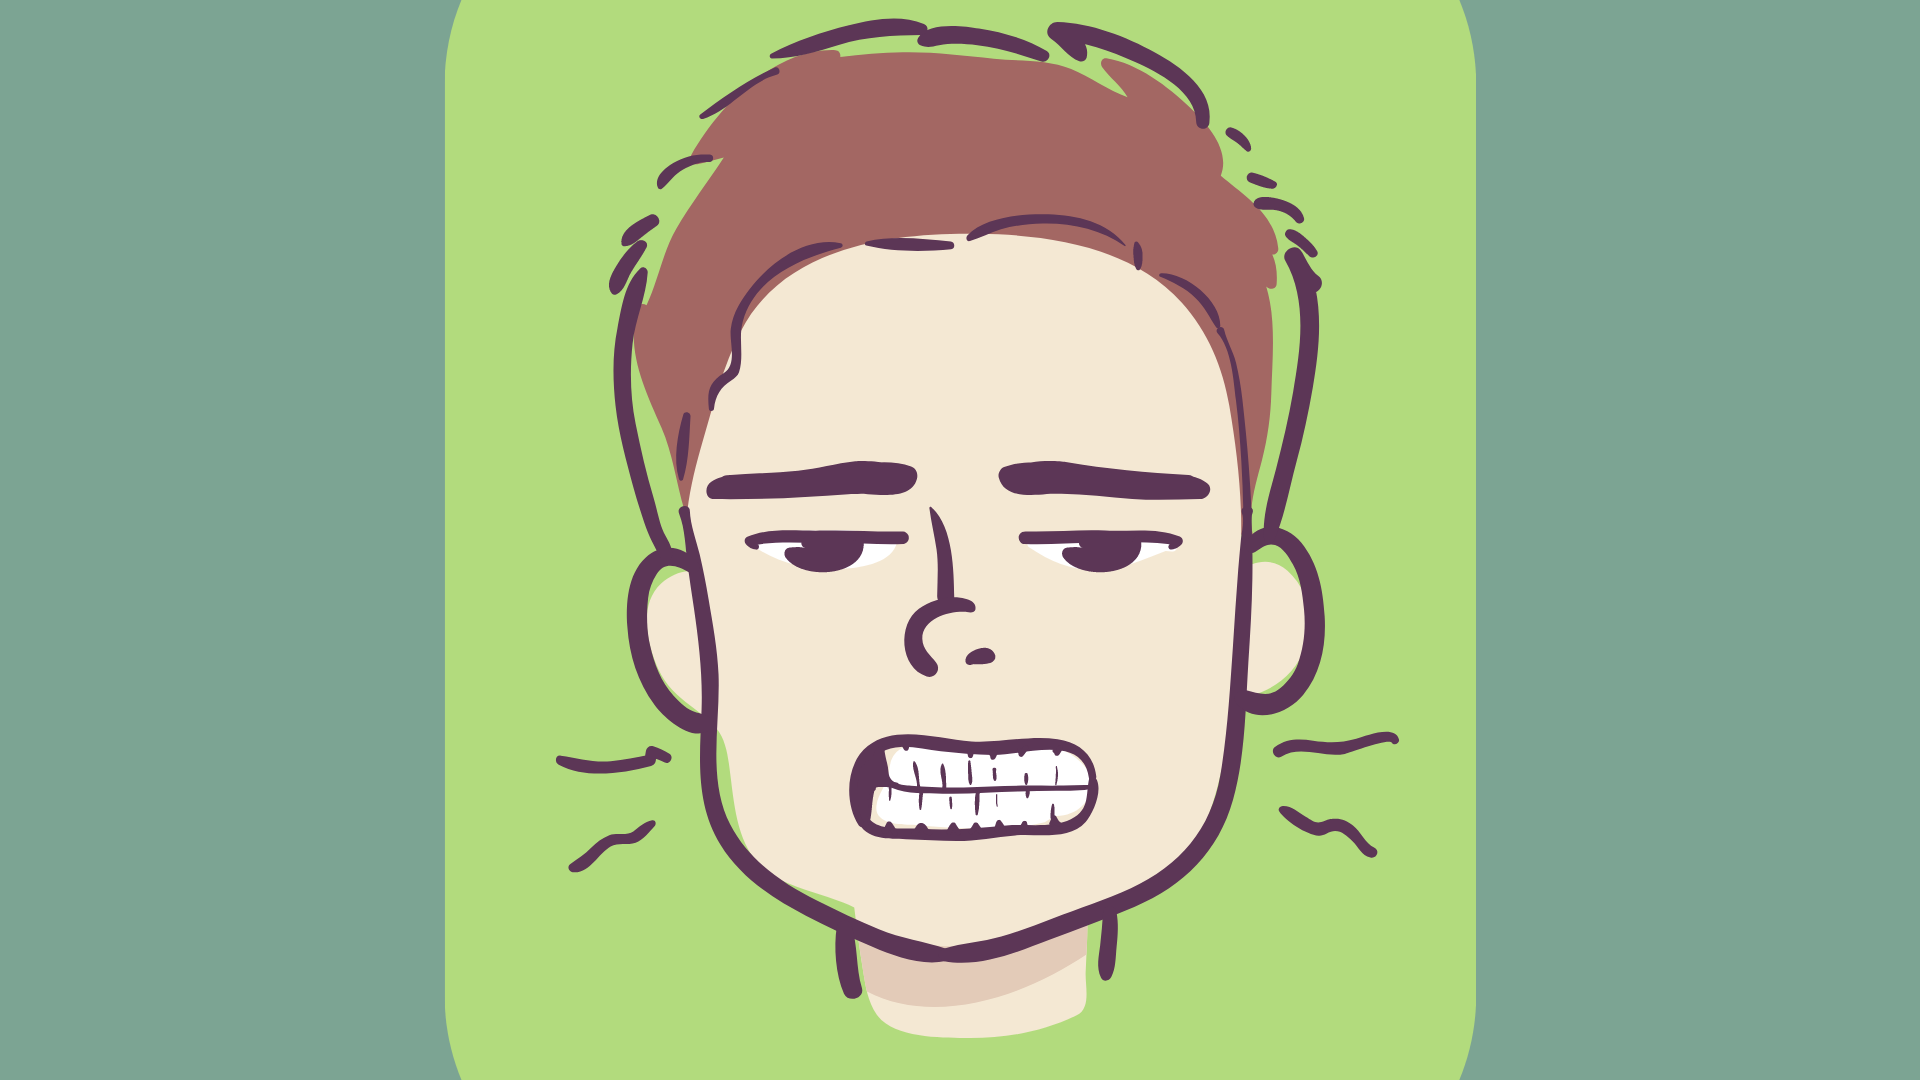 Bruxism: Teeth Grinding Causes & Solutions